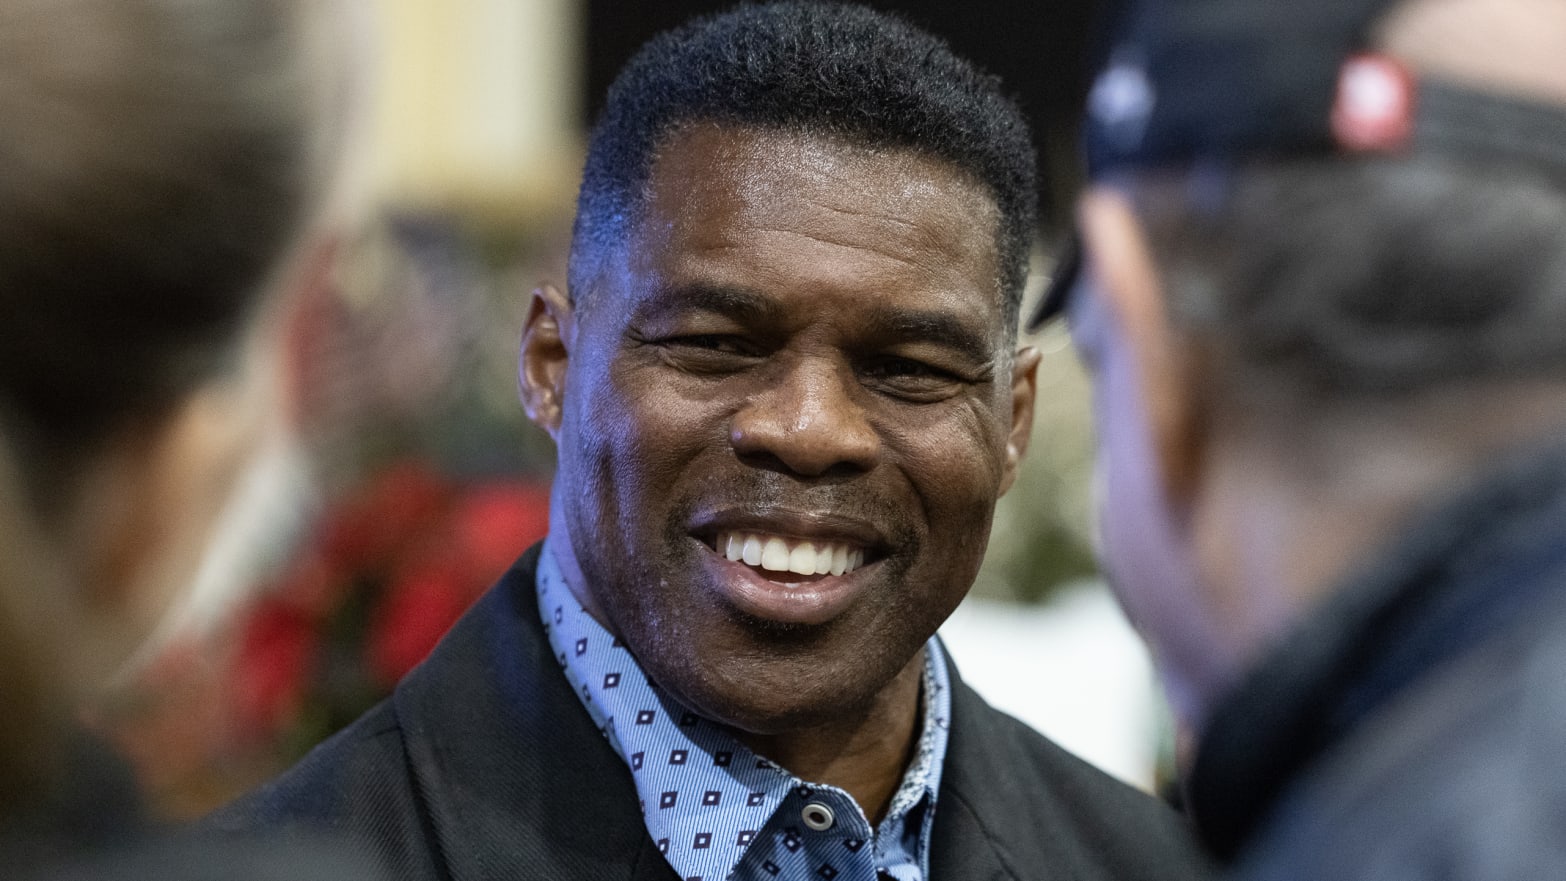 Corruption: Donor Confirms Massive Campaign Payment to Herschel Walker’s Company (thedailybeast.com)